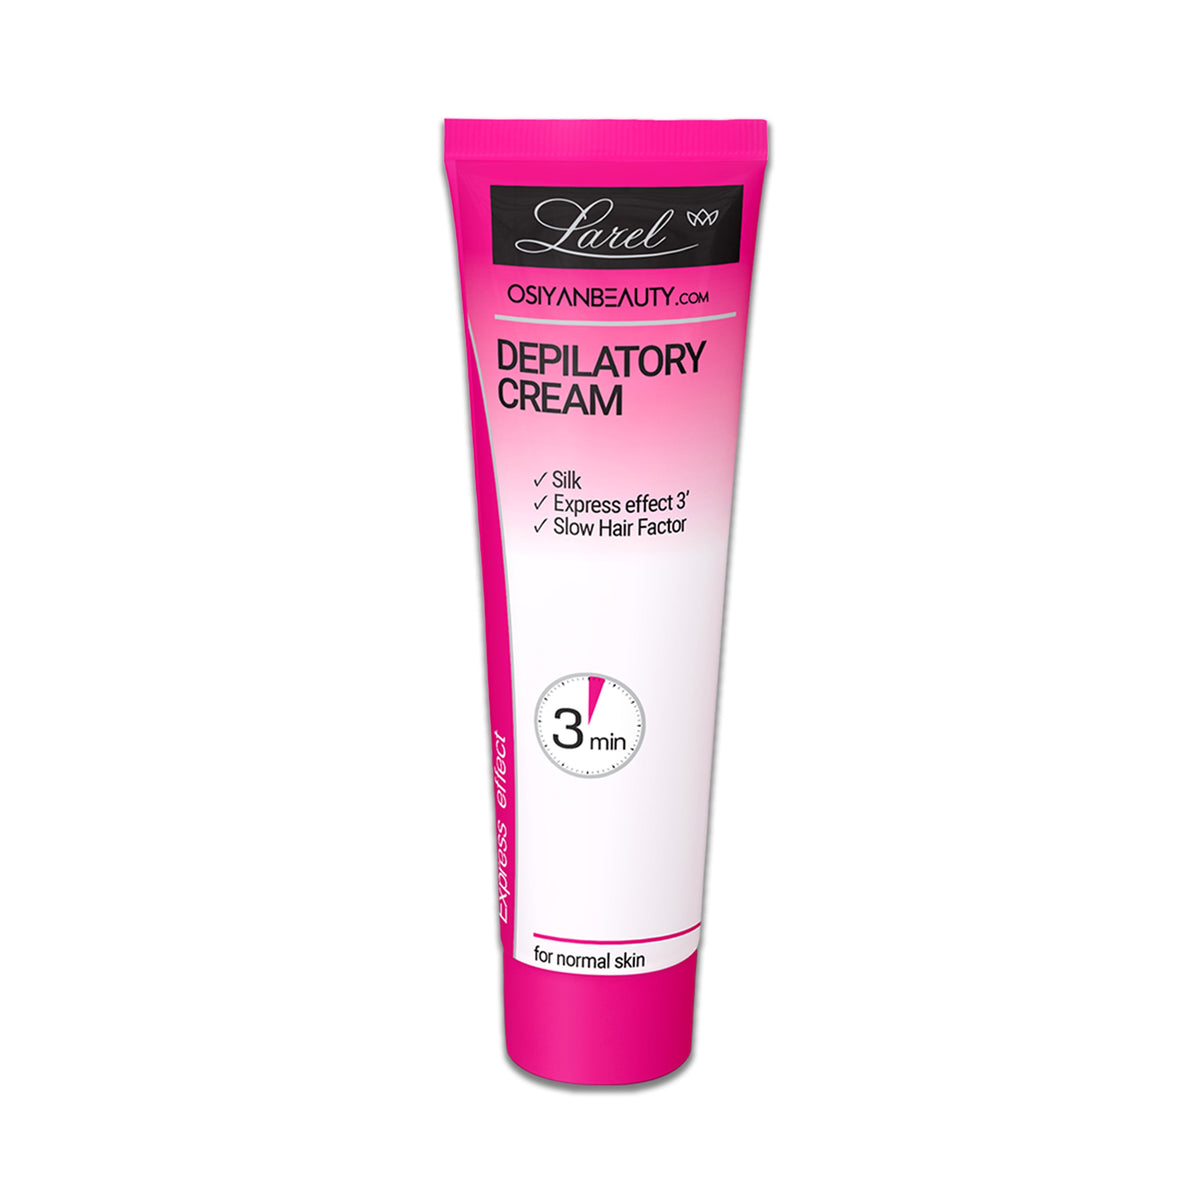 Depilatory cream  Silk, Express effect 3 min and slow hair factor(Made in Europe)